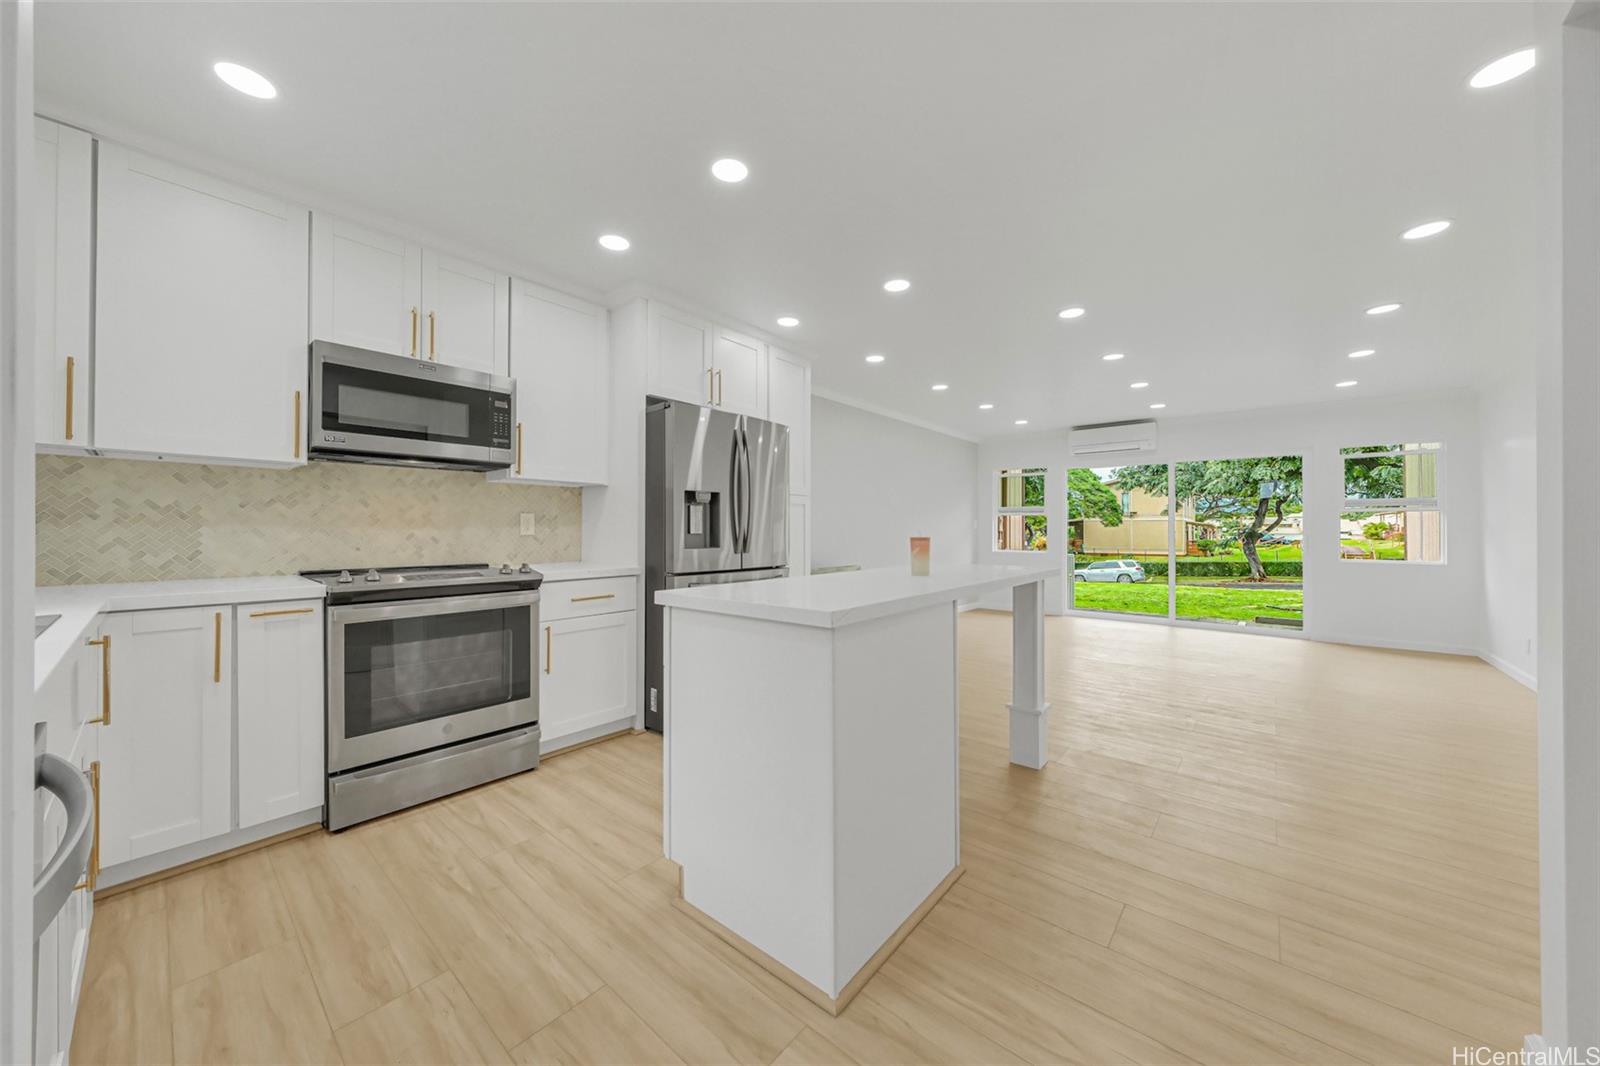 a kitchen with stainless steel appliances kitchen island granite countertop a stove top oven a sink and a microwave